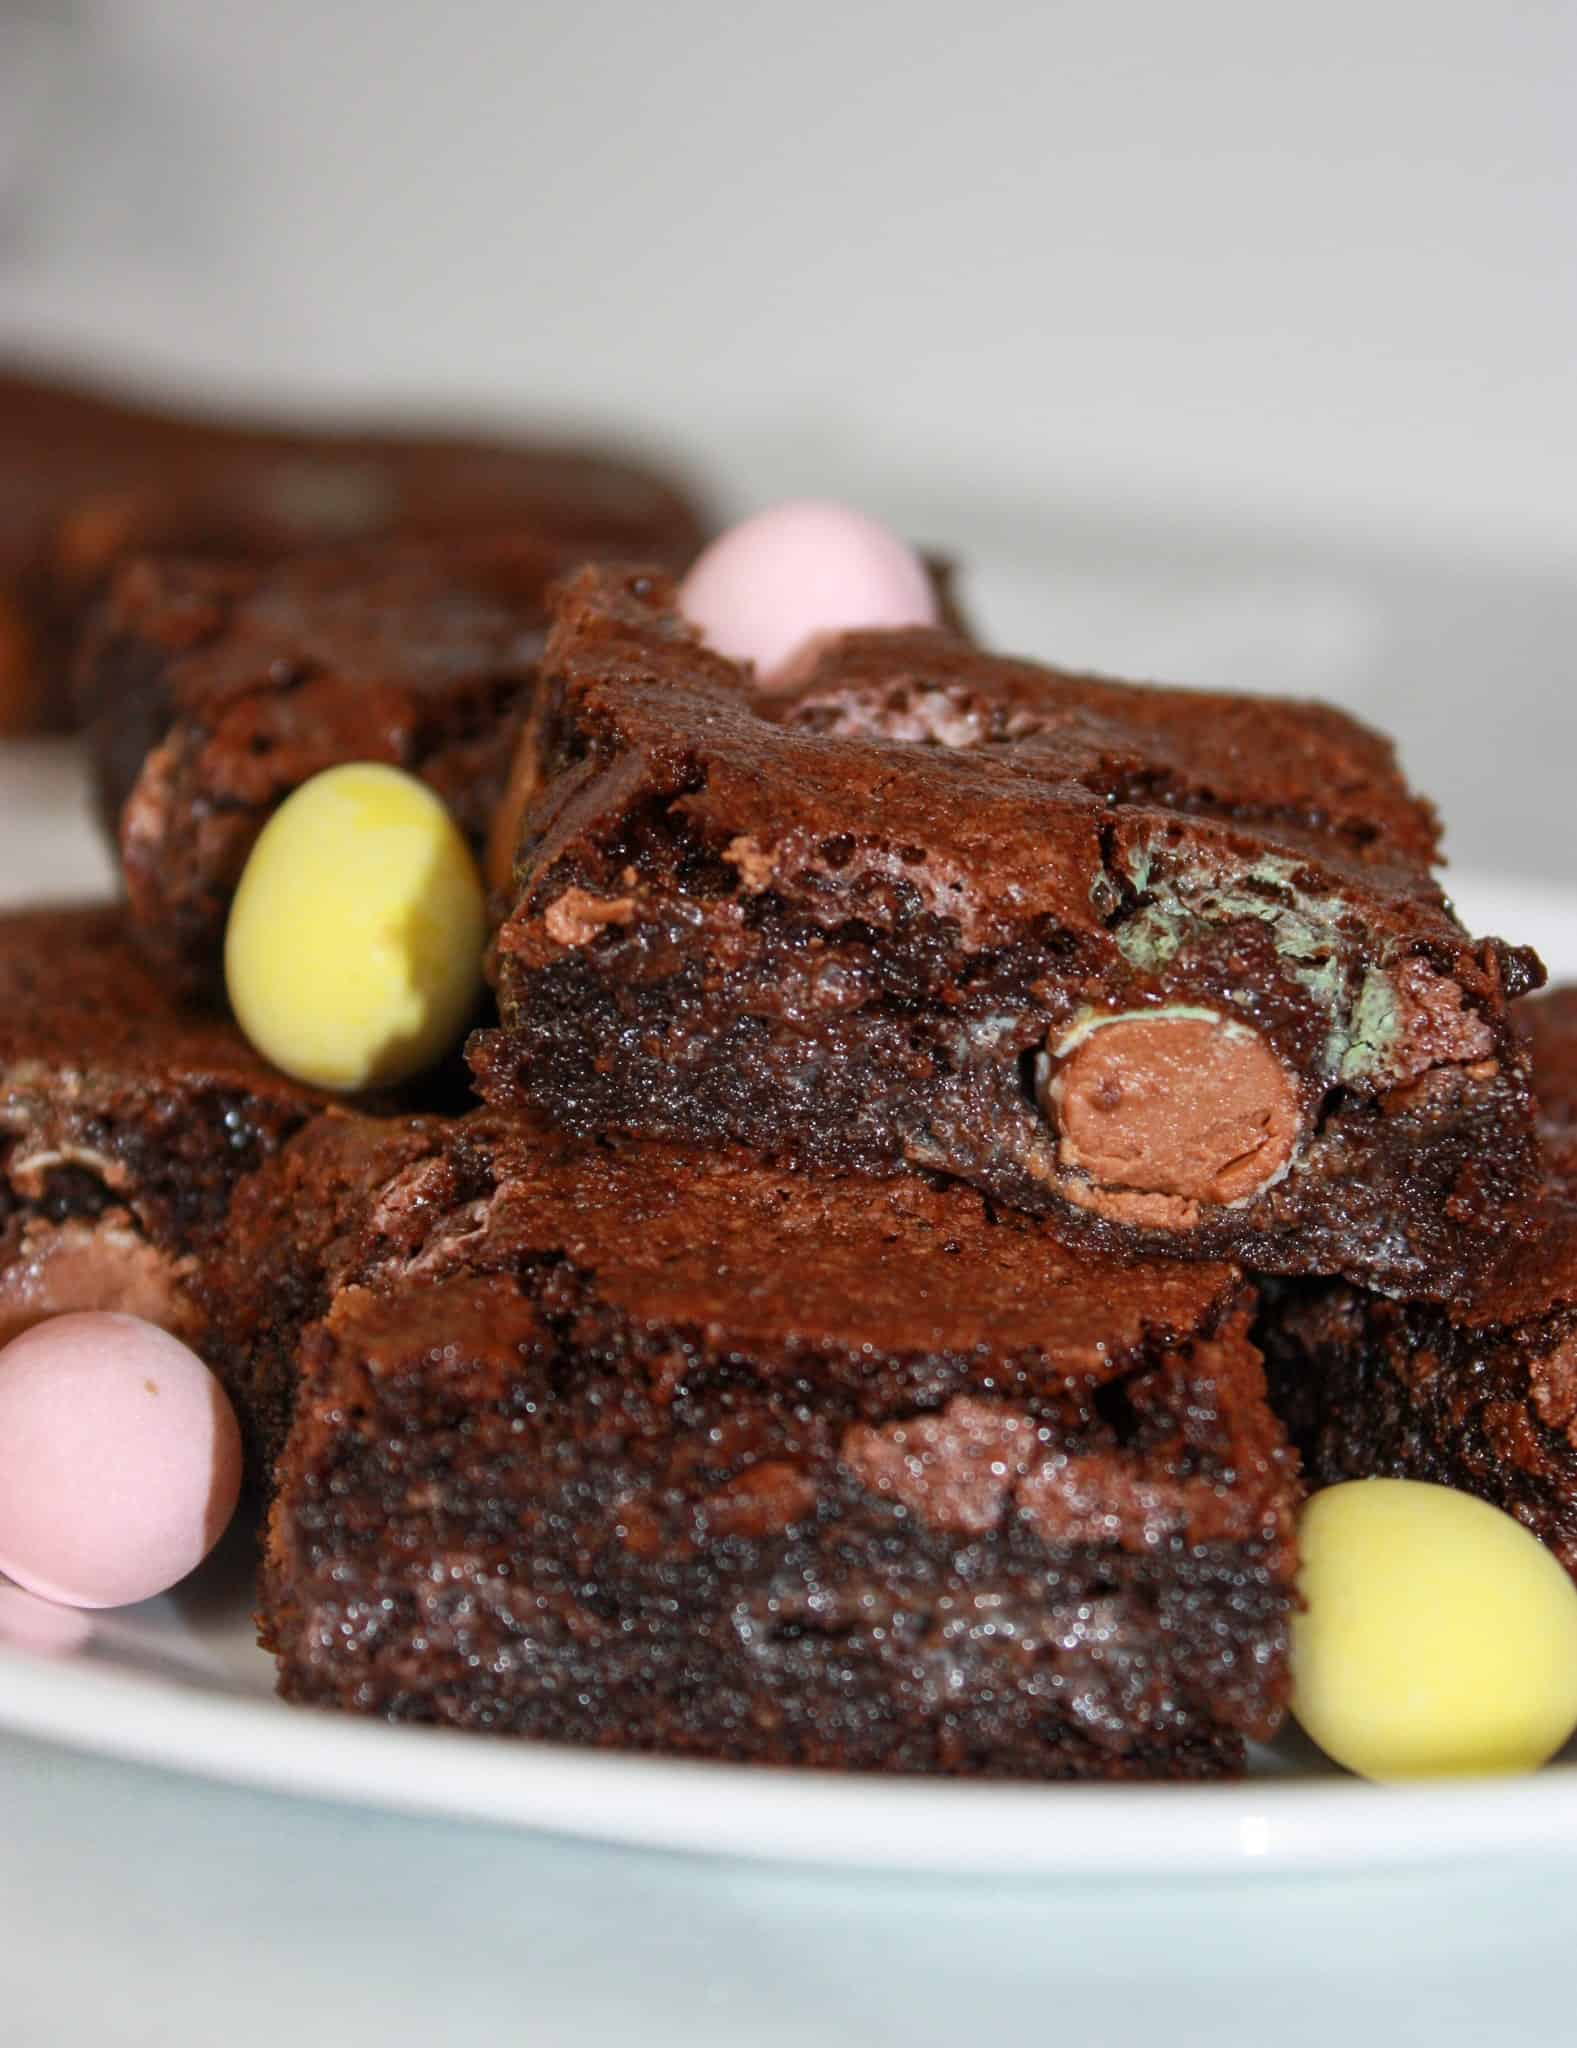 Whether you add Mini Egg Brownies with Almond Flour to your Easter dessert tray, or bake them a few weeks later to use up Easter candy, you will enjoy their gooey, chocolate decadence.